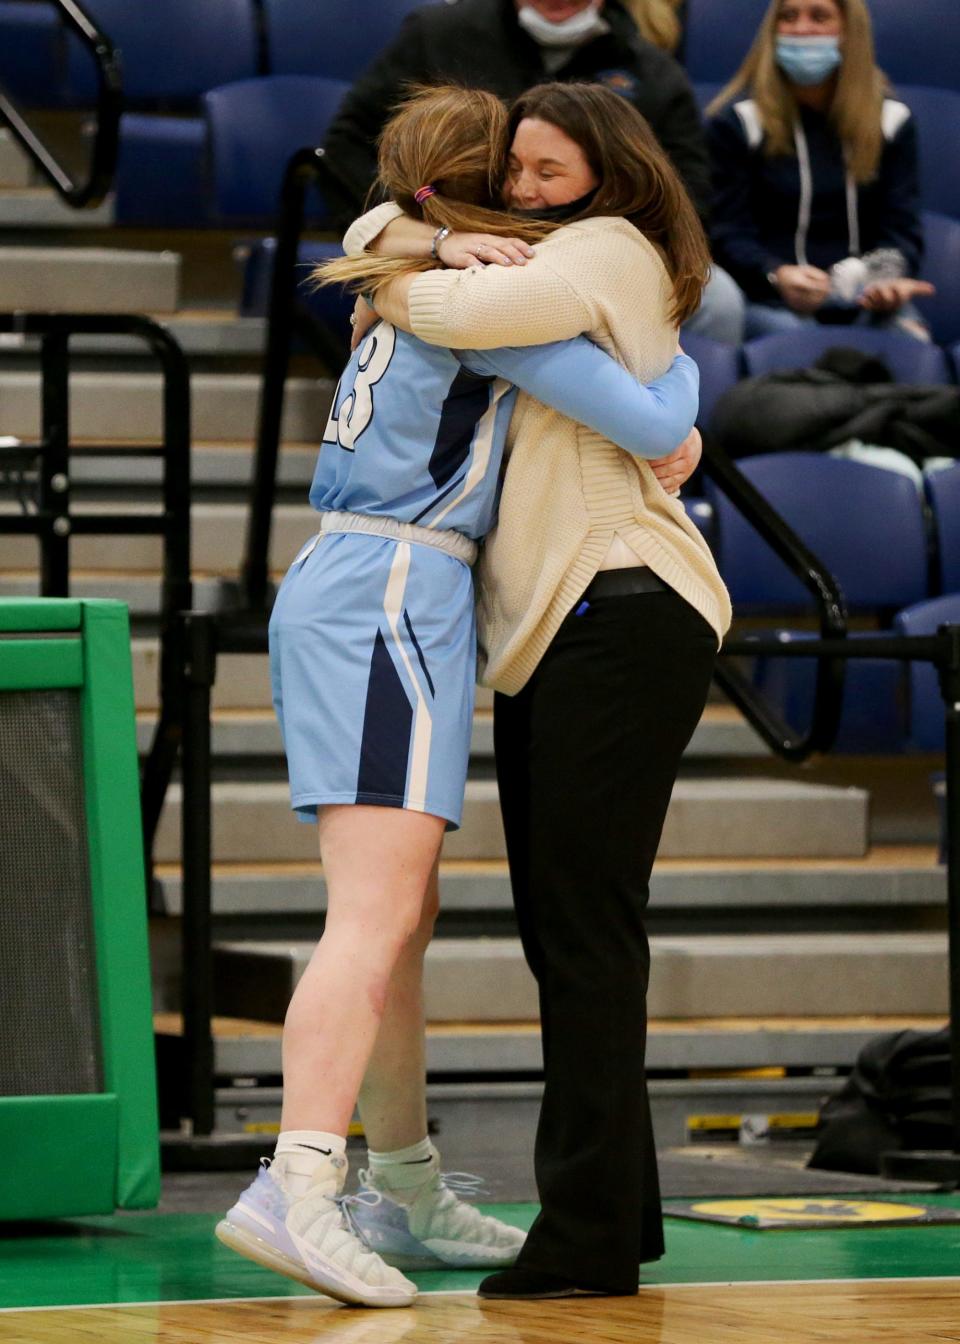 York High School girls basketball coach Jess Stacy, right, scored a 1,000 points and played with a shot clock in her career at Sharon High School in Massachusetts. She said it was strange to not have a shot clock when she began coaching in Maine.